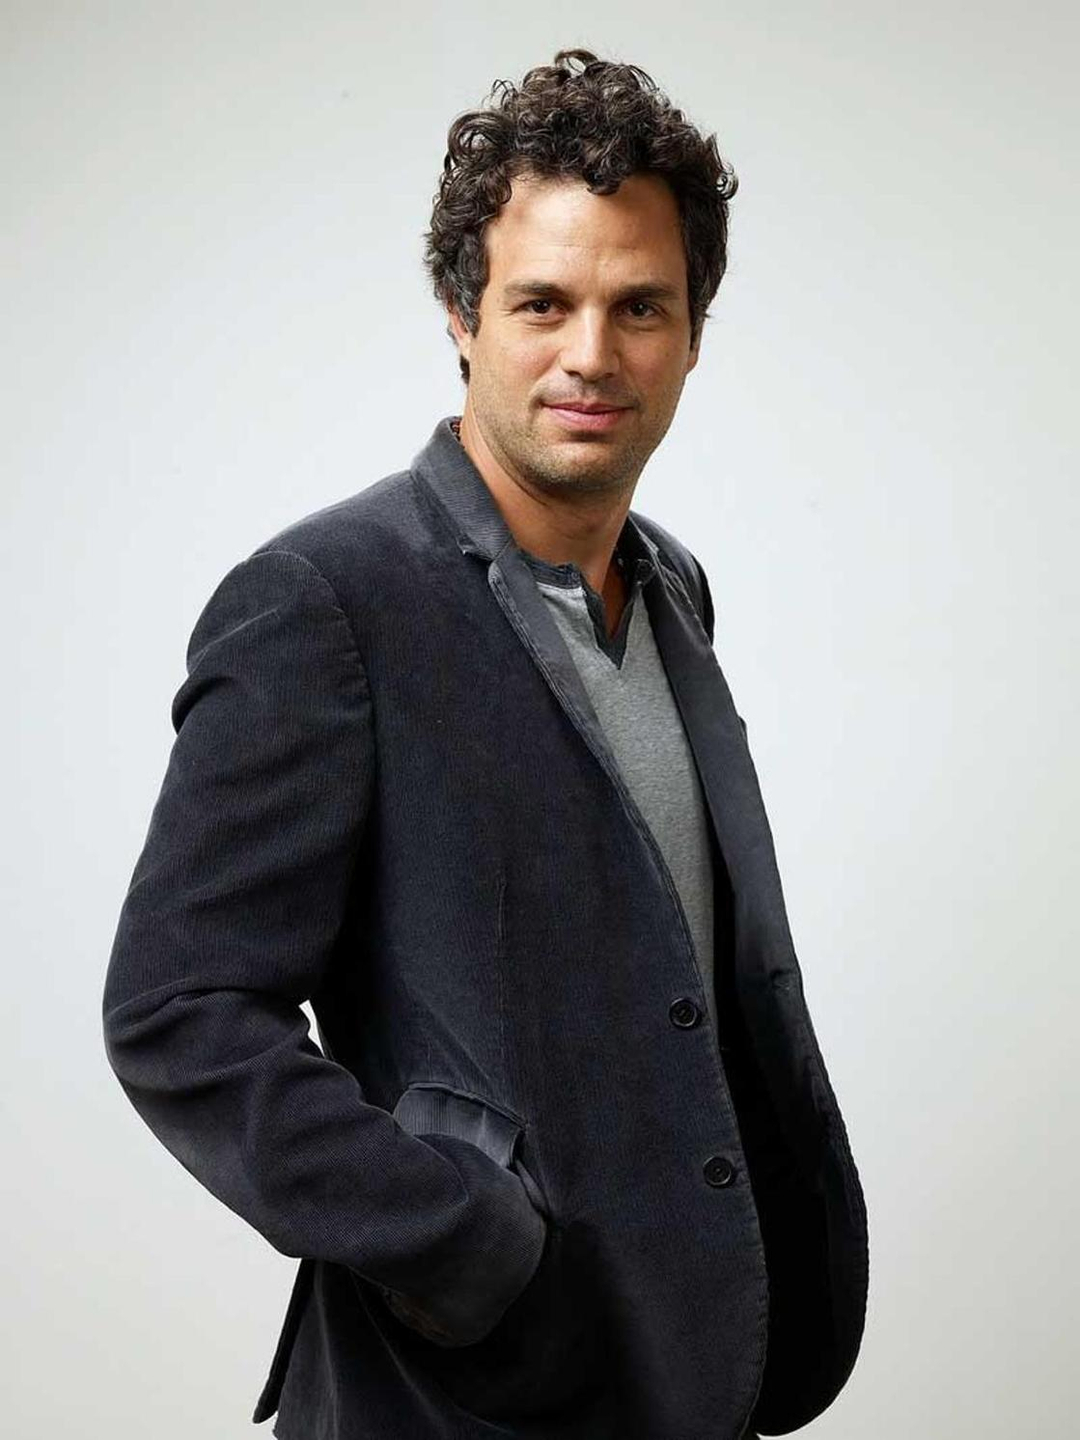 Mark Ruffalo who is his mother